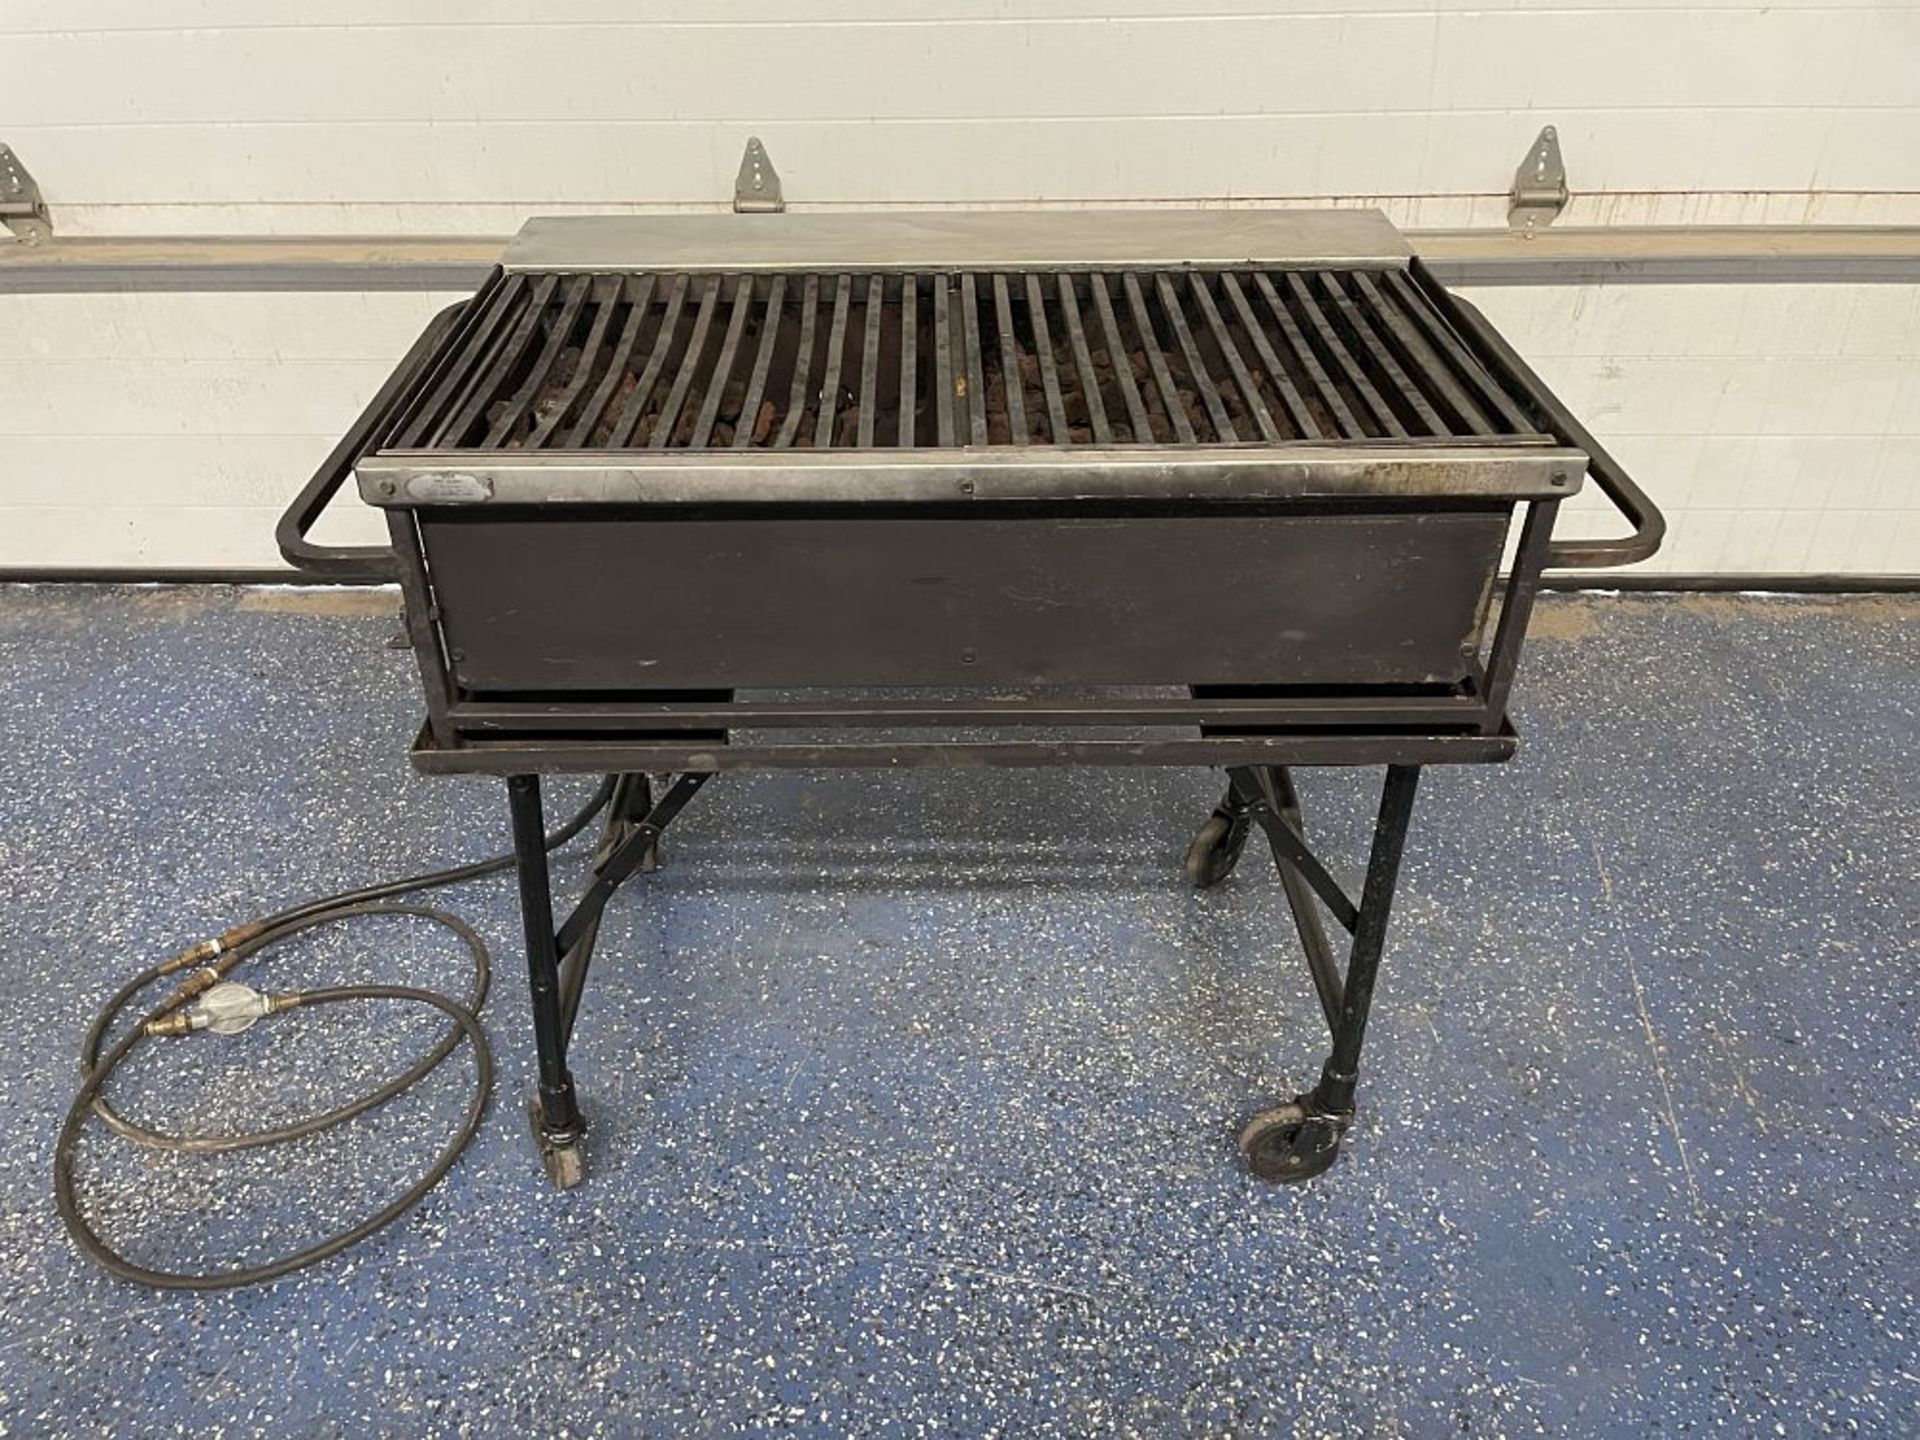 3' GRILL, PROPANE NOT INCLUDED - Image 2 of 2